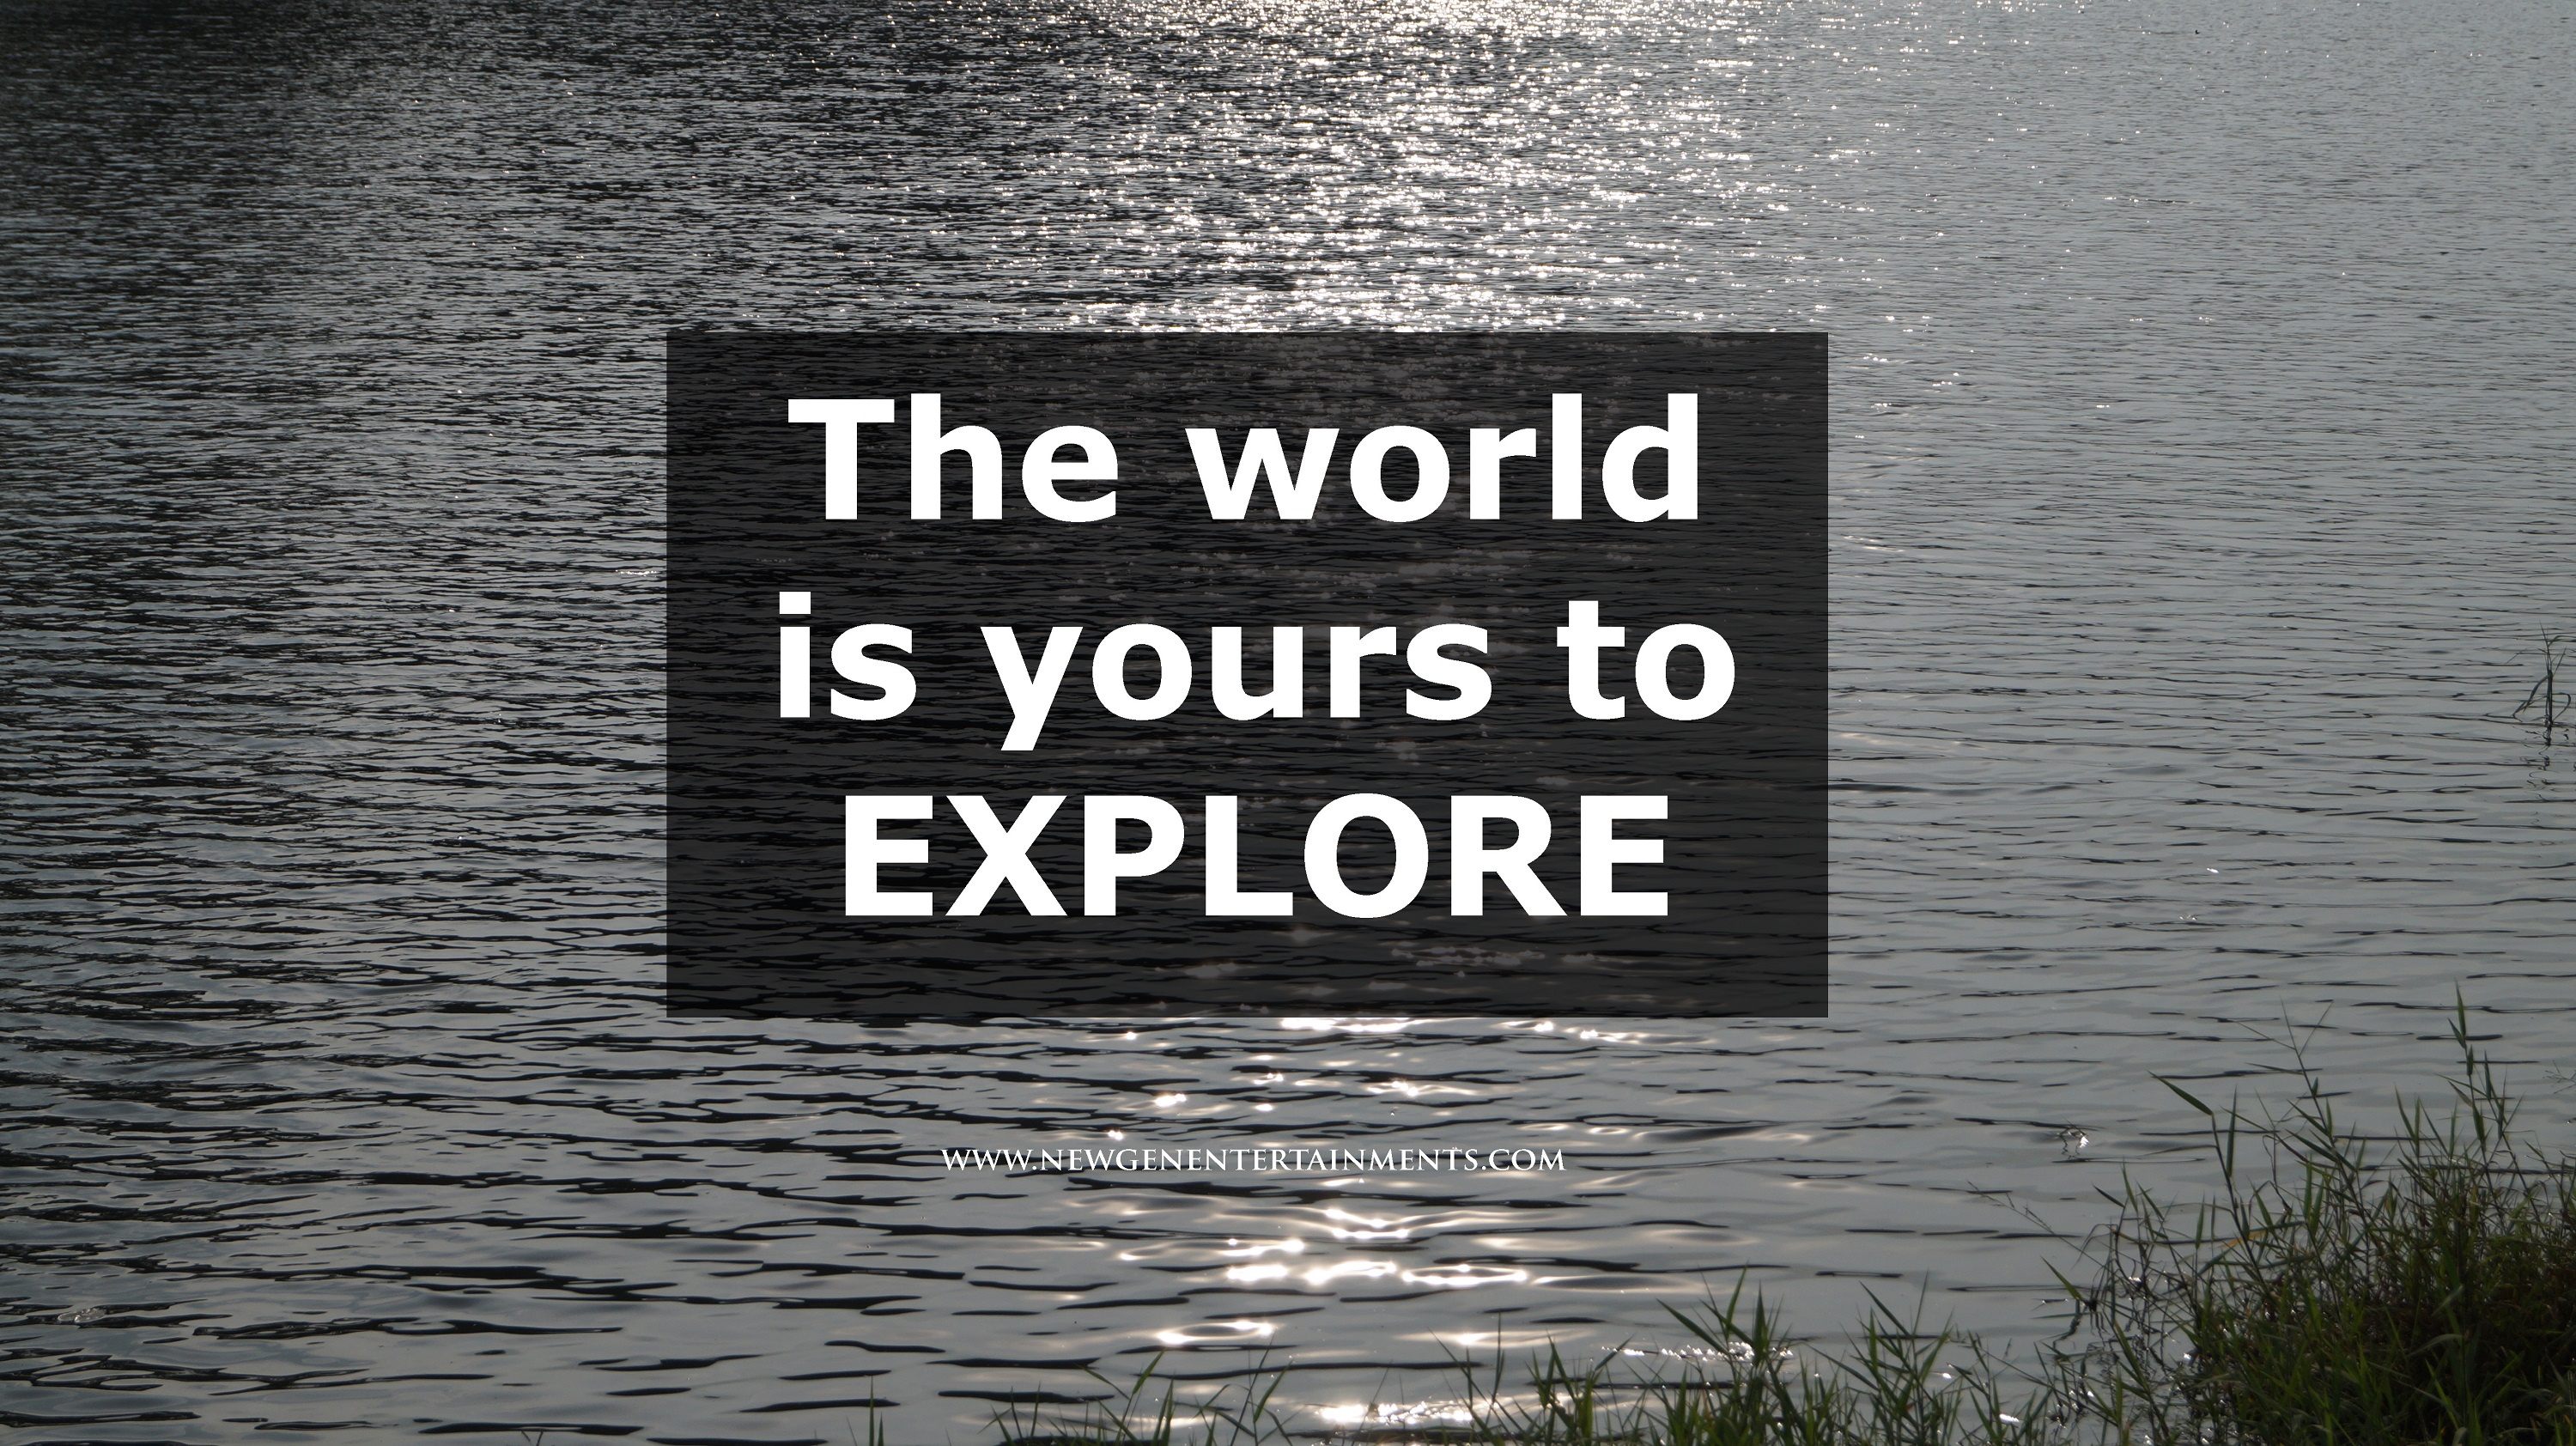 The world is yours to explore